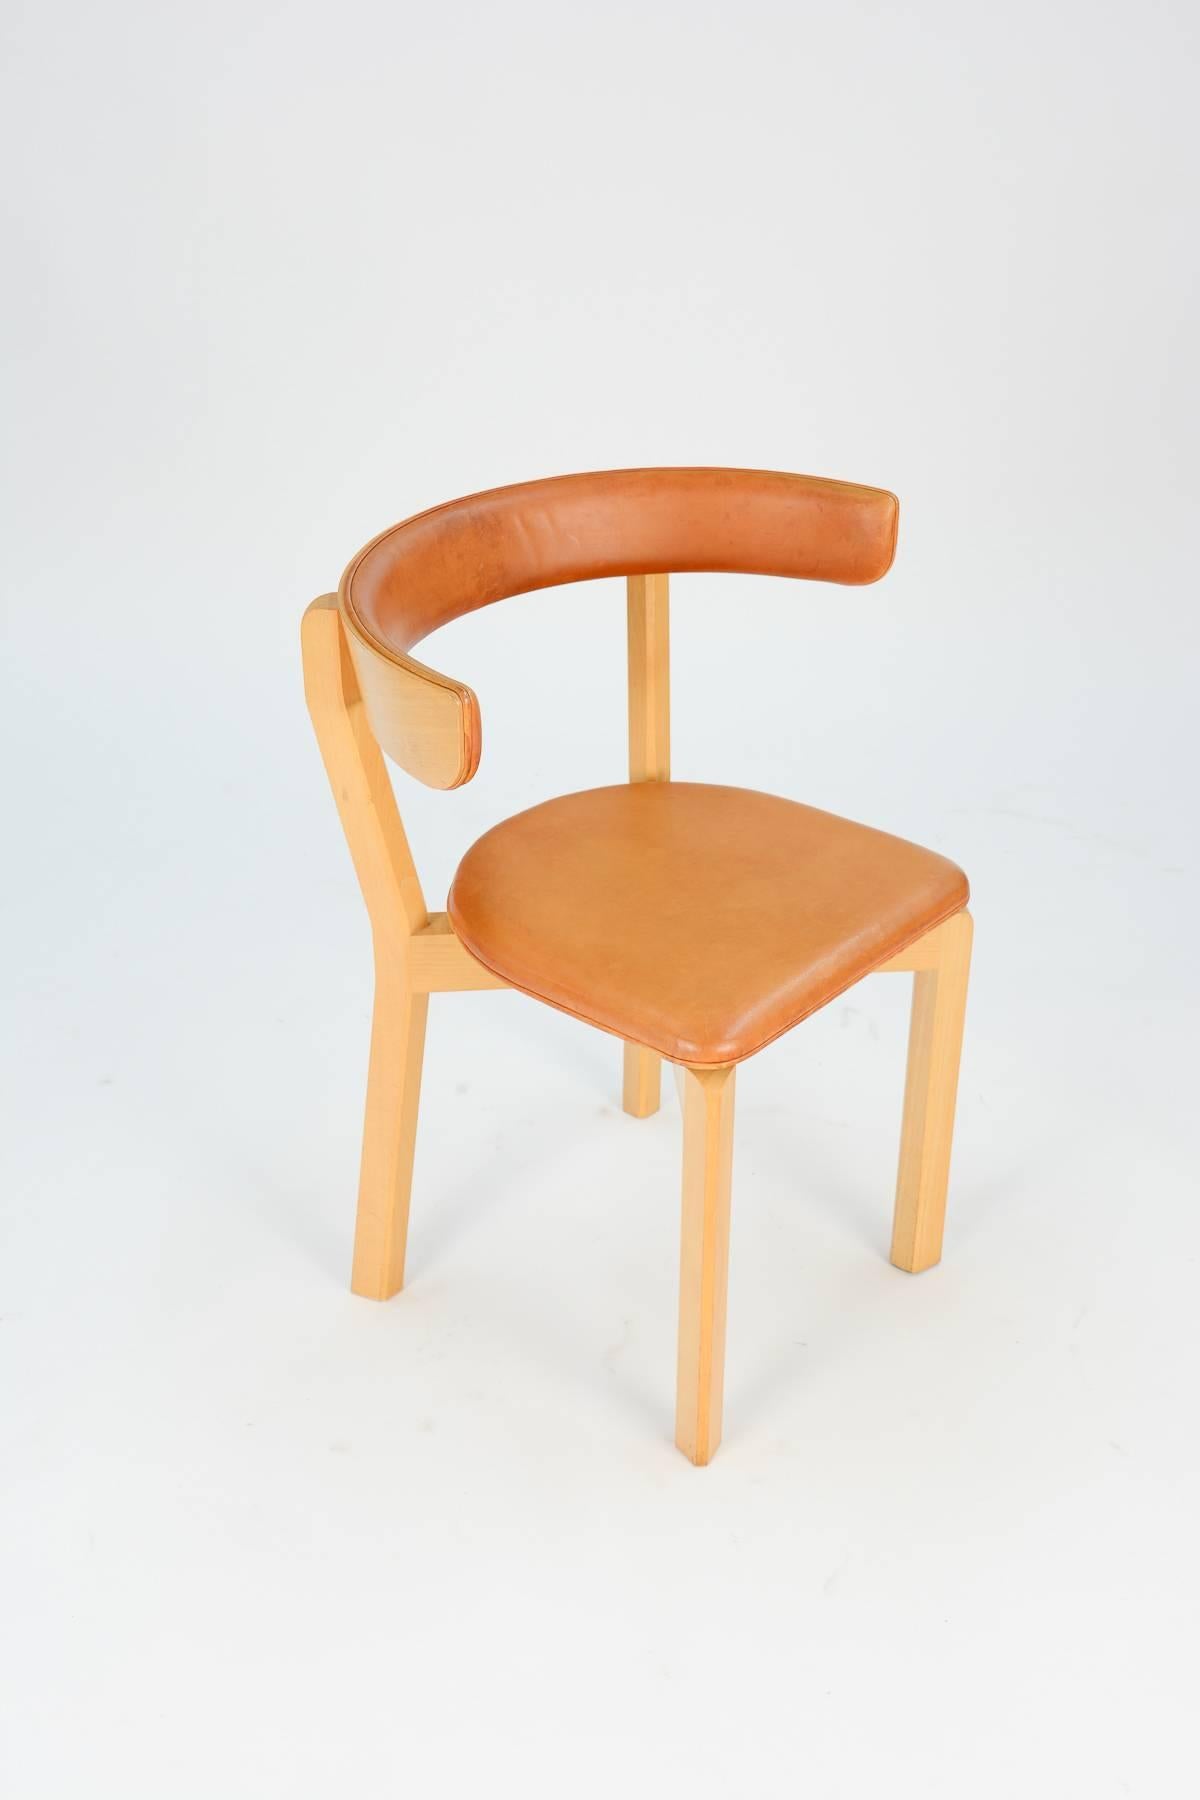 Danish Up to 3 Jorgen Gammelgaard Surround Back Dining Chairs in Congac Leather